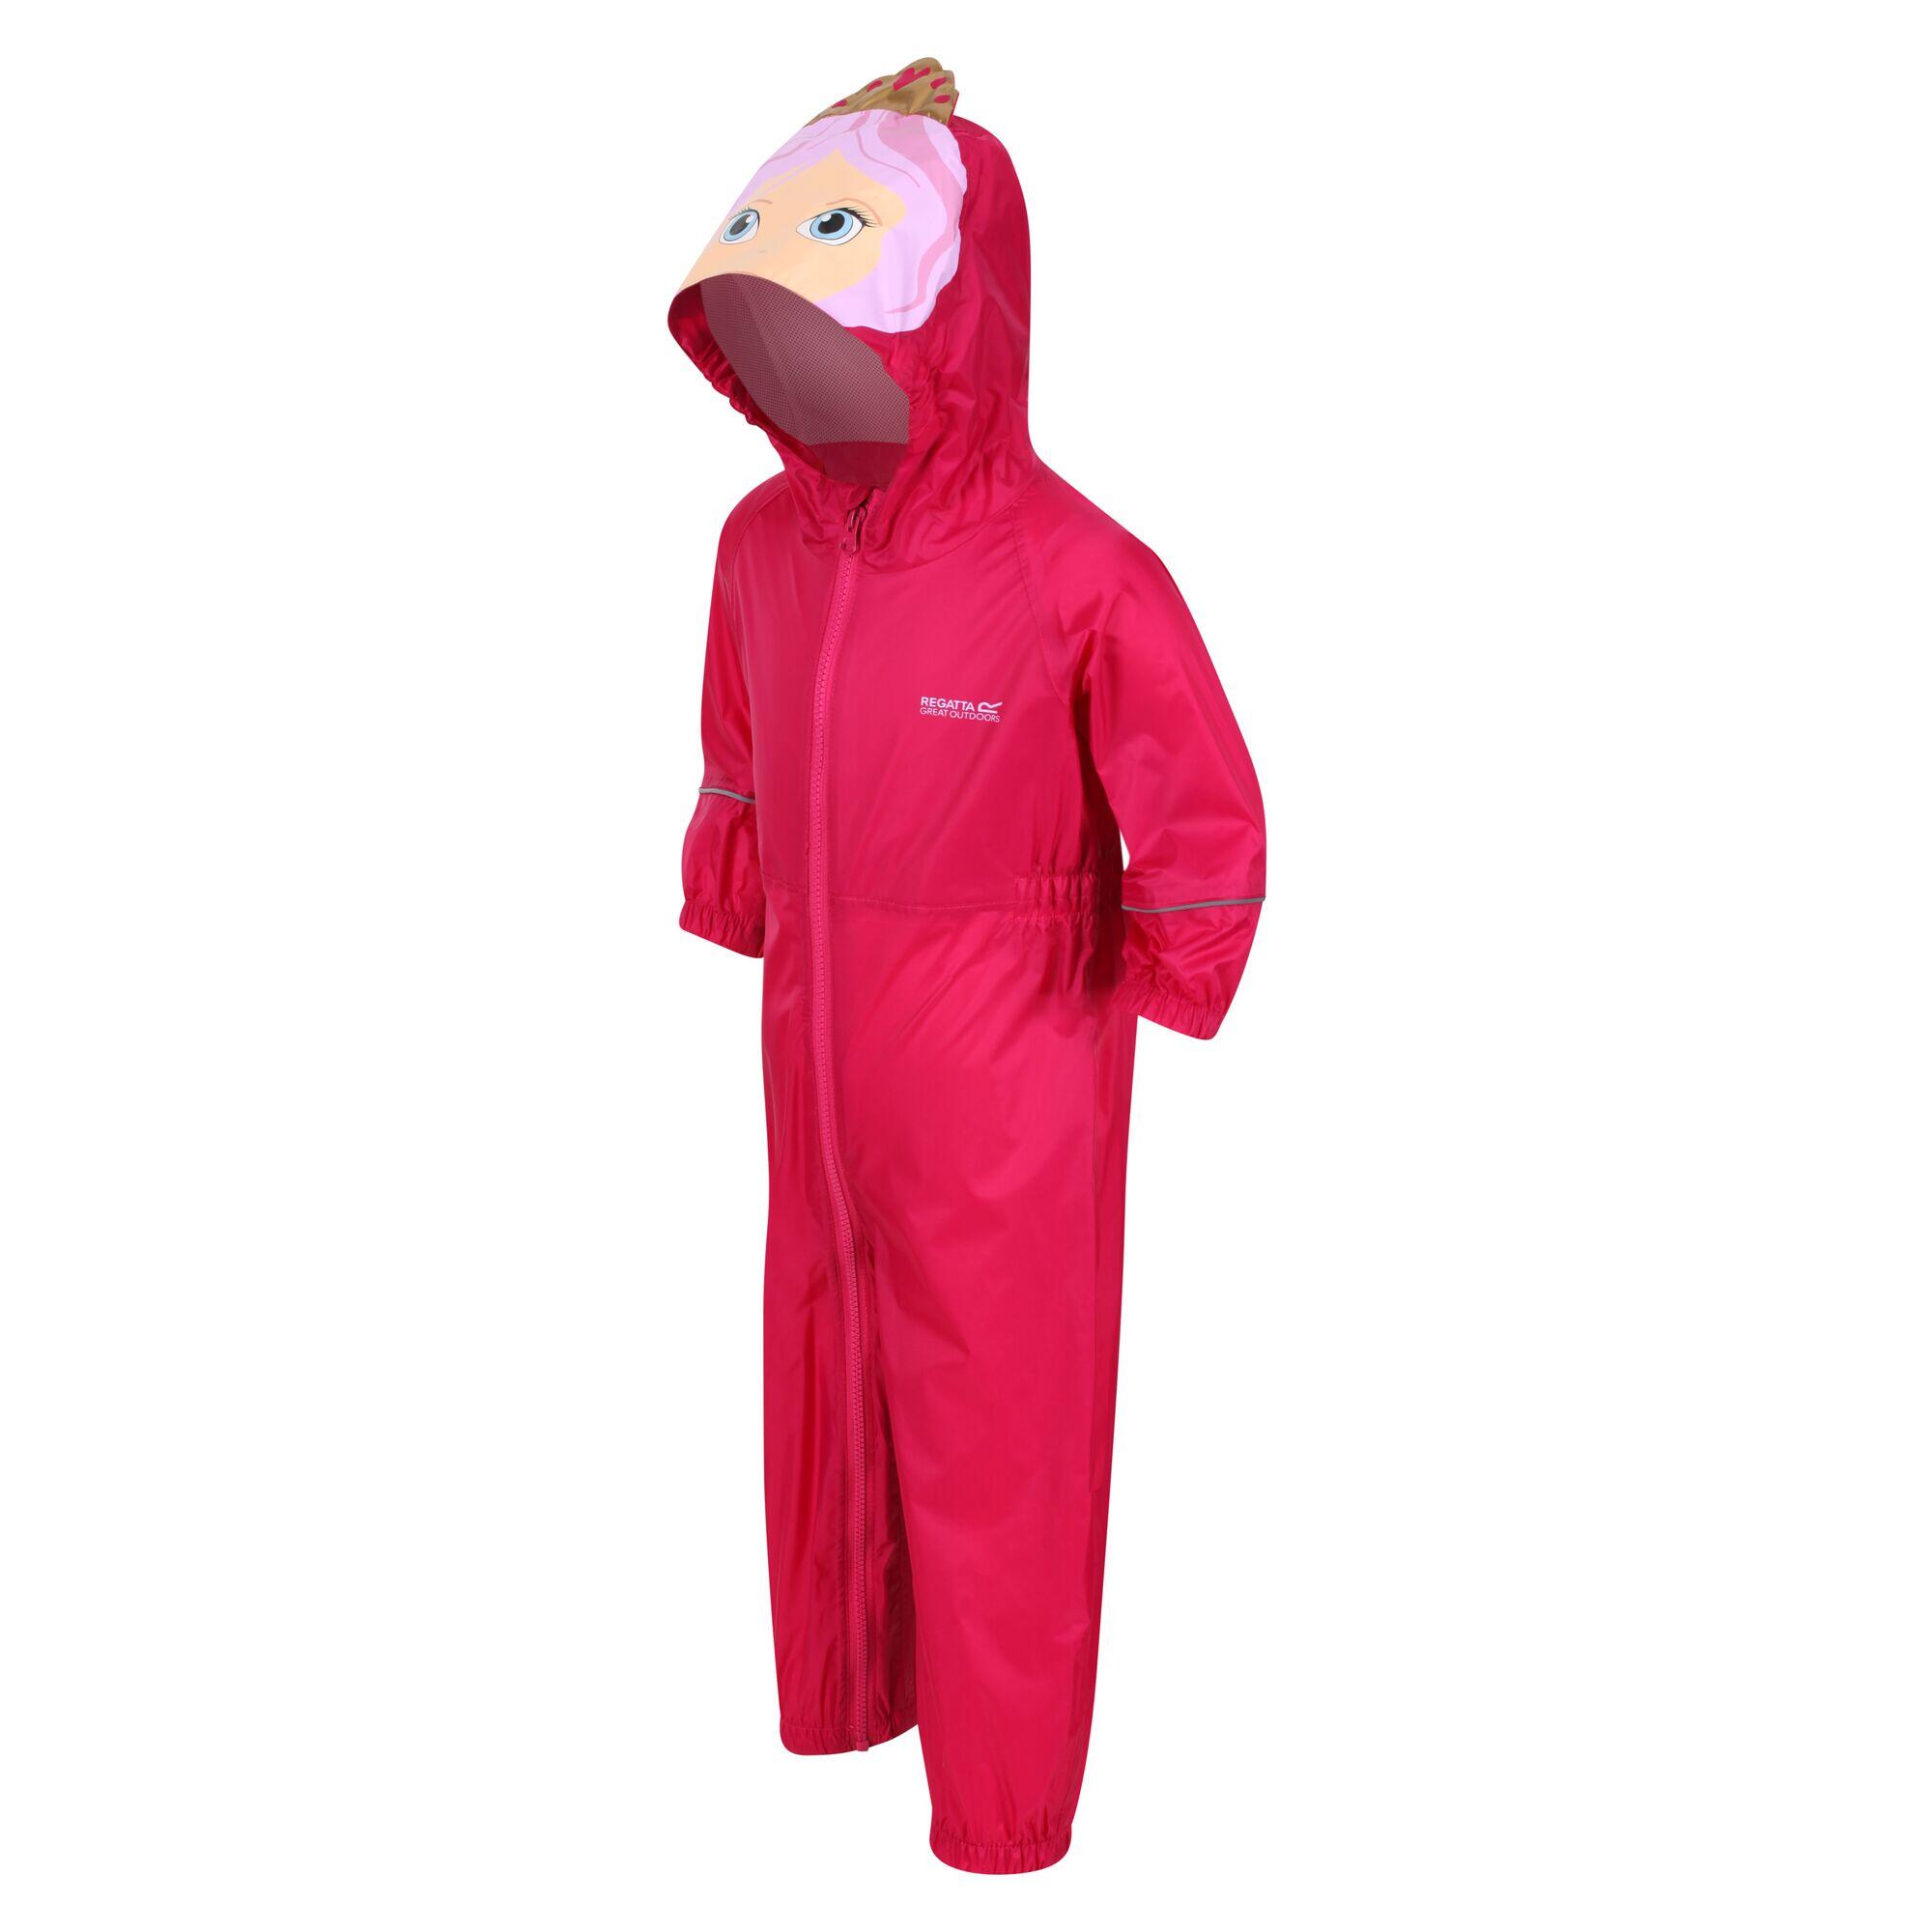 Charco Kids Hiking Hooded Puddle Suit - Pink Princess 4/5